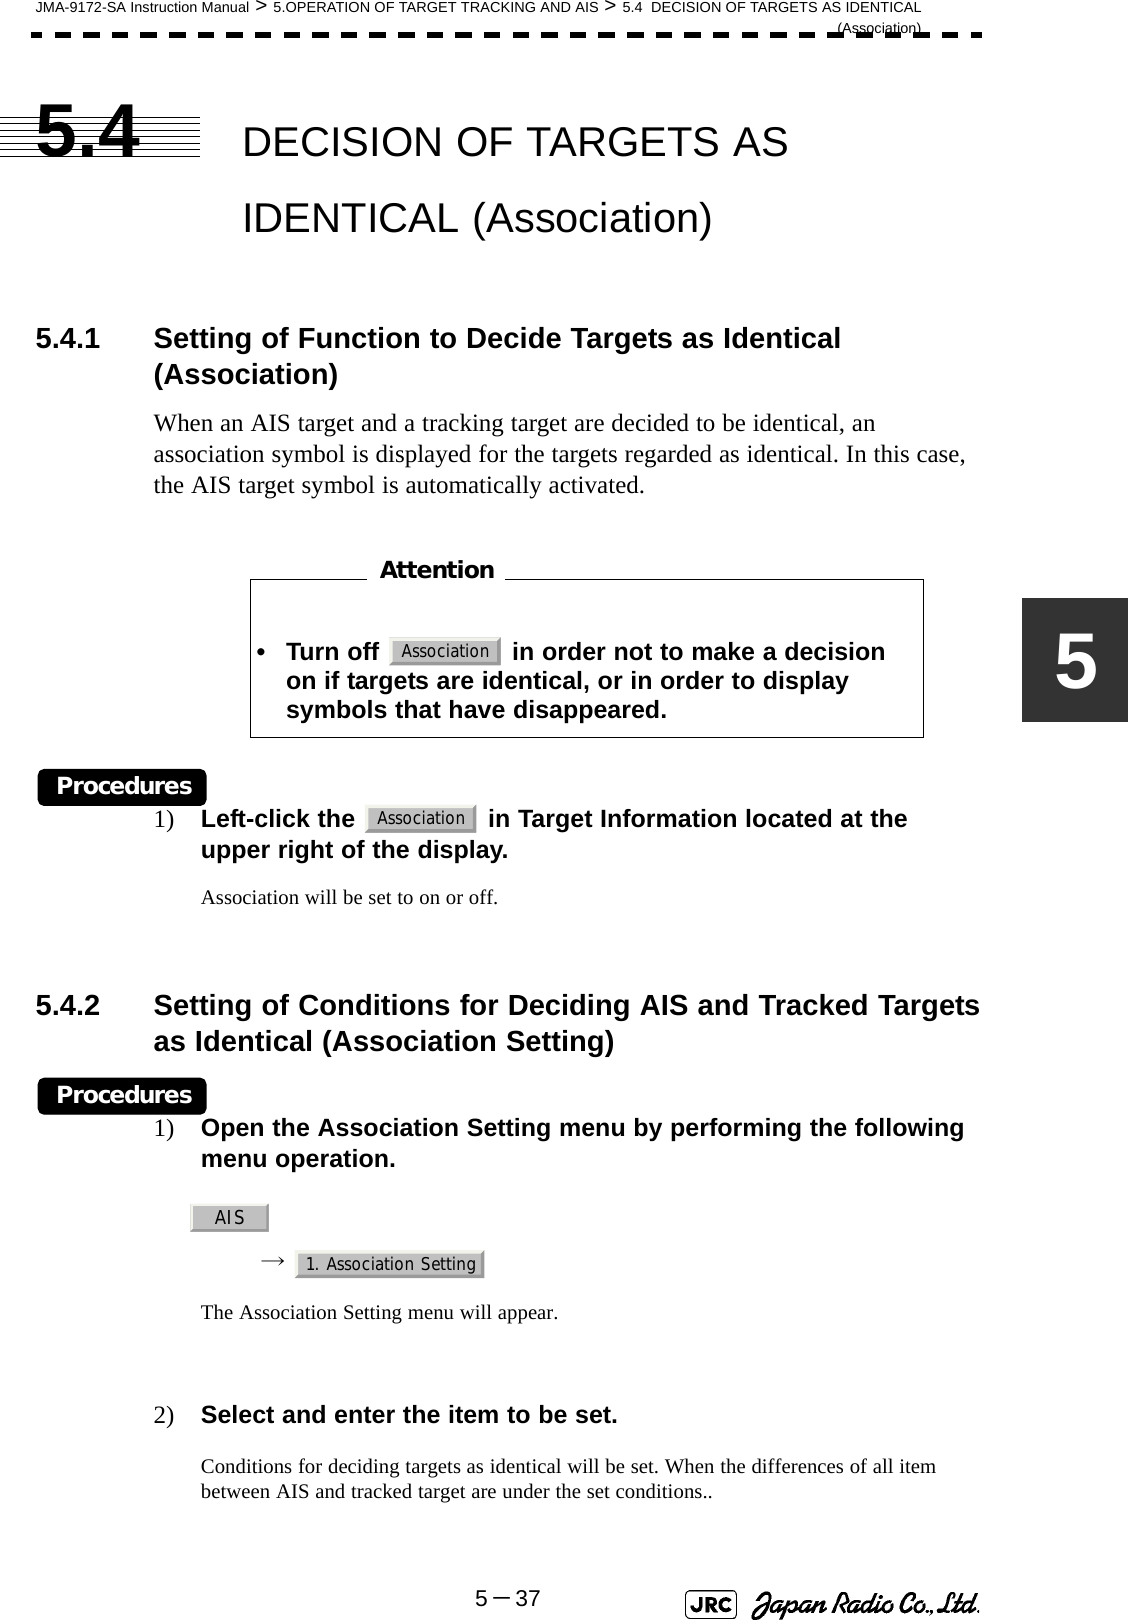 JMA-9172-SA Instruction Manual &gt; 5.OPERATION OF TARGET TRACKING AND AIS &gt; 5.4  DECISION OF TARGETS AS IDENTICAL(Association)5－3755.4 DECISION OF TARGETS AS IDENTICAL (Association)5.4.1 Setting of Function to Decide Targets as Identical (Association)When an AIS target and a tracking target are decided to be identical, an association symbol is displayed for the targets regarded as identical. In this case, the AIS target symbol is automatically activated.　　　　　　　　Procedures1) Left-click the   in Target Information located at the upper right of the display.Association will be set to on or off.5.4.2 Setting of Conditions for Deciding AIS and Tracked Targetsas Identical (Association Setting)Procedures1) Open the Association Setting menu by performing the following menu operation.→ The Association Setting menu will appear.2) Select and enter the item to be set.Conditions for deciding targets as identical will be set. When the differences of all item between AIS and tracked target are under the set conditions..• Turn off   in order not to make a decision on if targets are identical, or in order to display symbols that have disappeared.AttentionAssociationAssociationAIS1. Association Setting